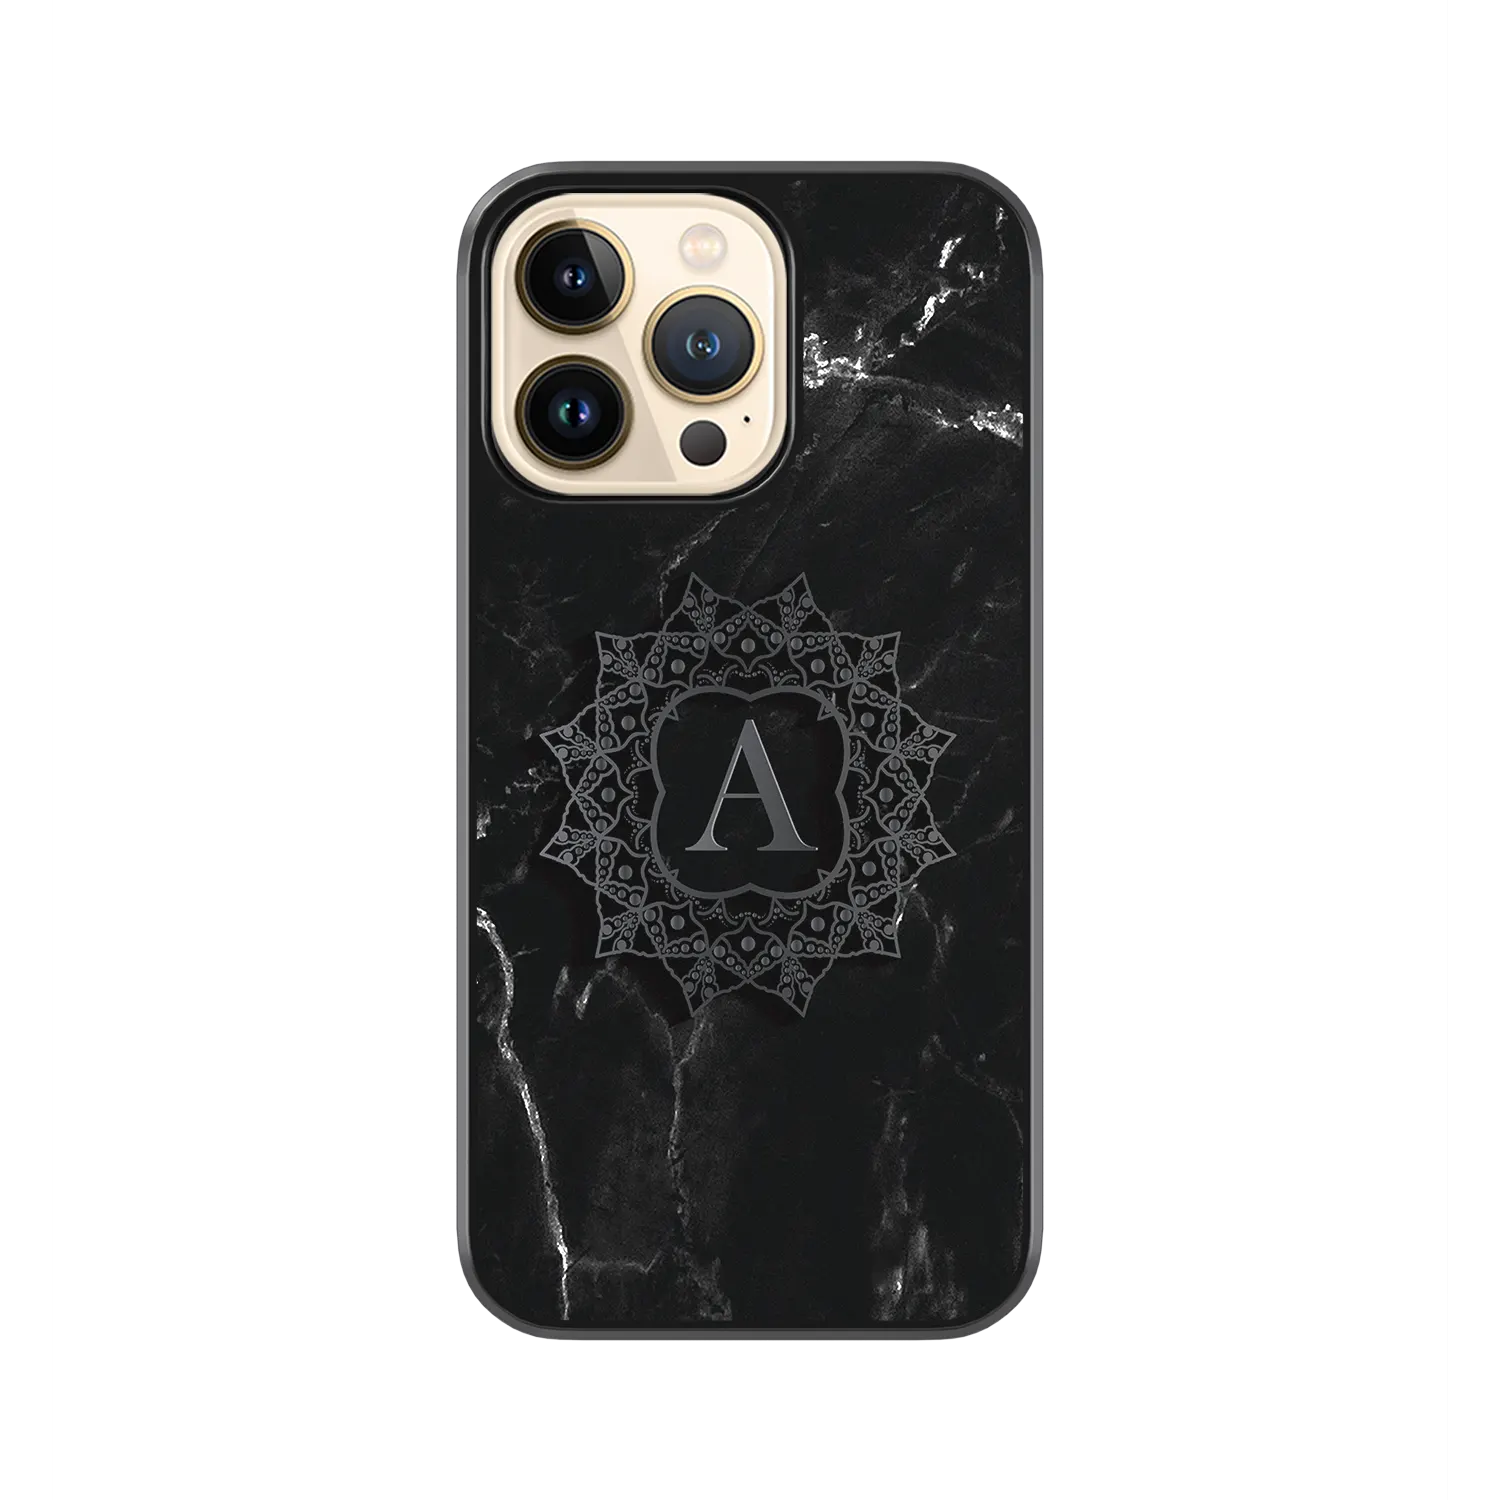 Achlys iphone 11 pro cover